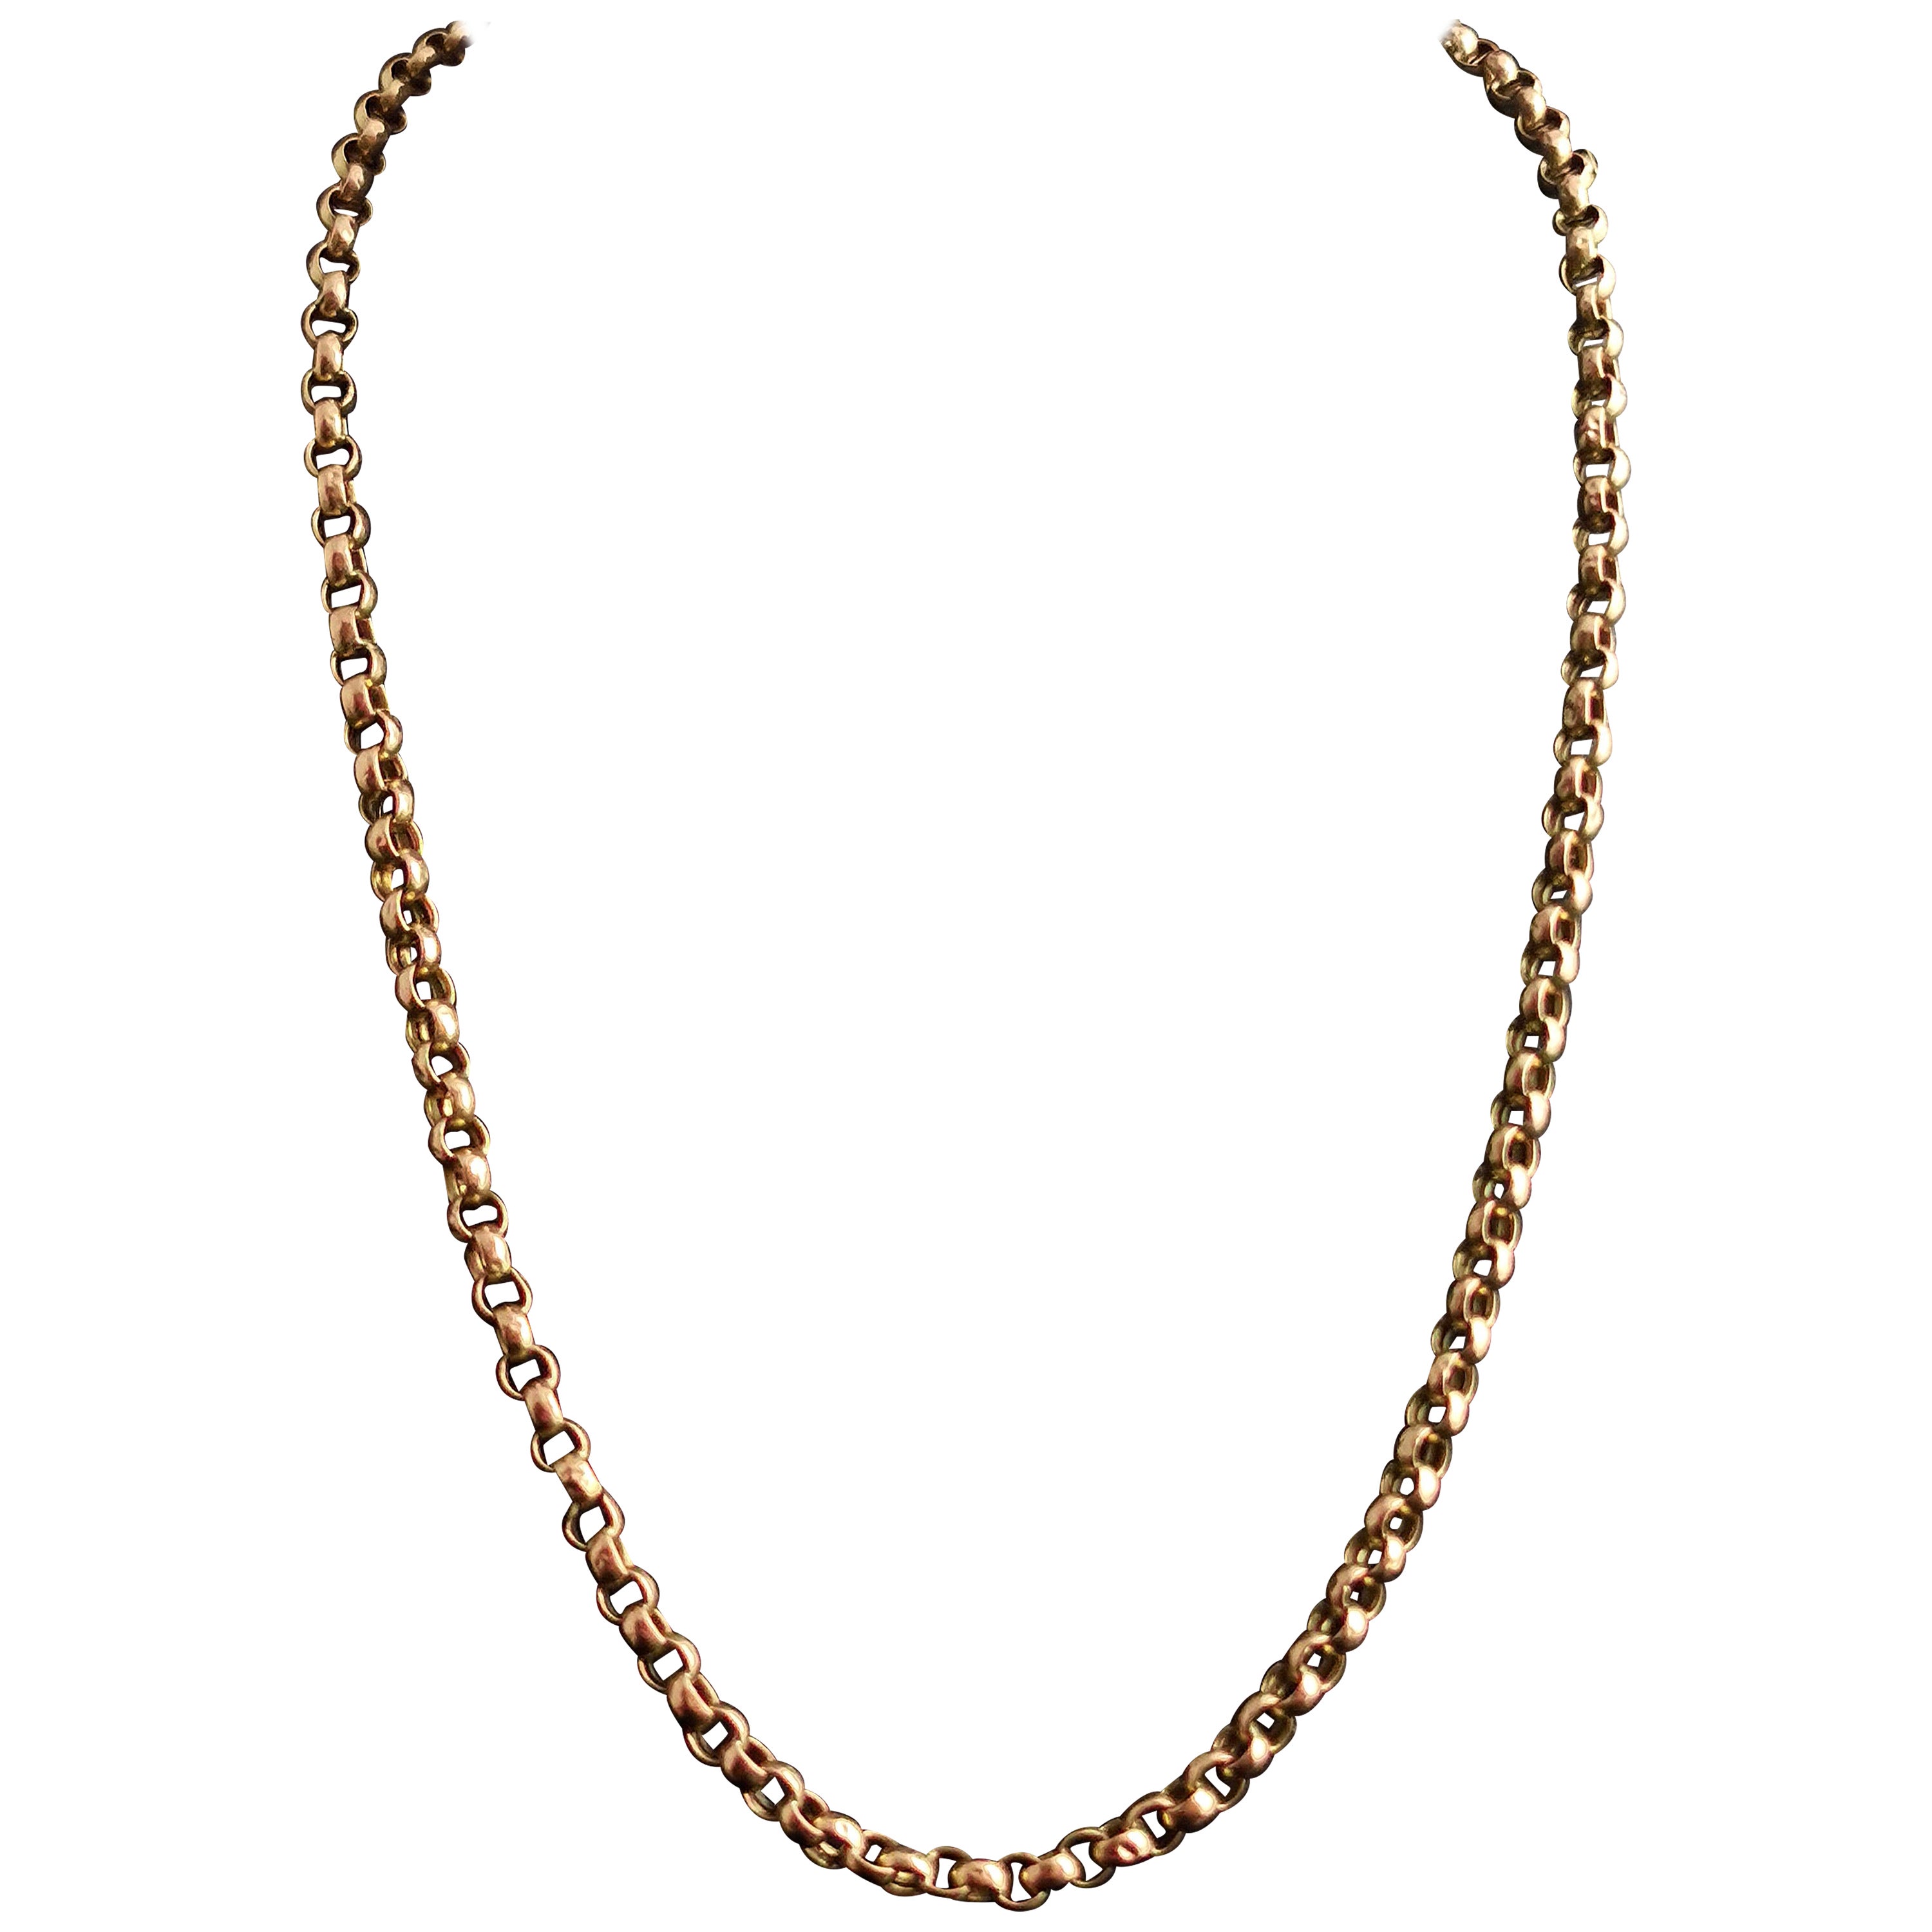 Antique 9 Karat Yellow Gold Rolo Link Chain Necklace